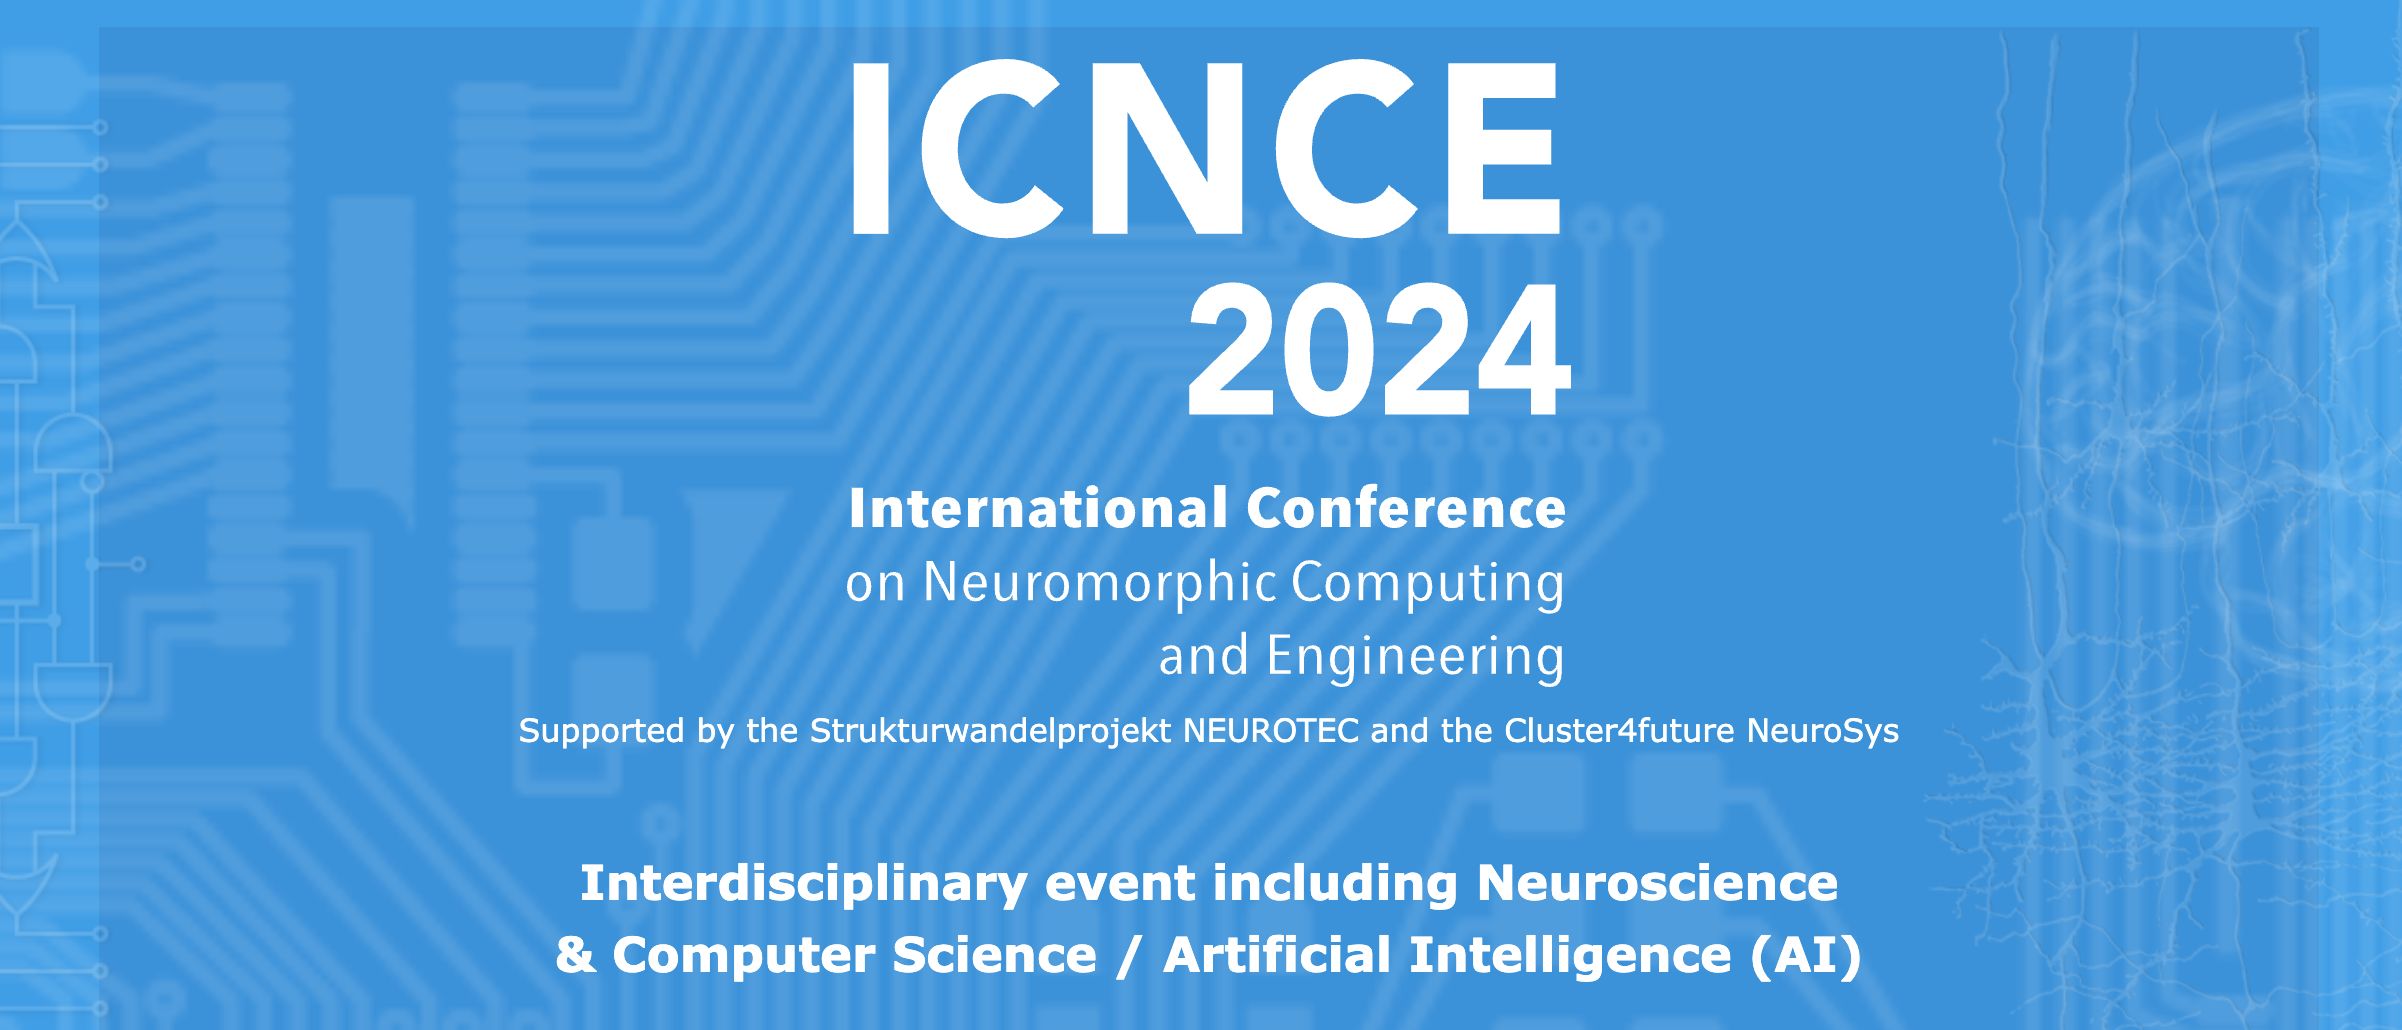 ICNCE 2024 Banner